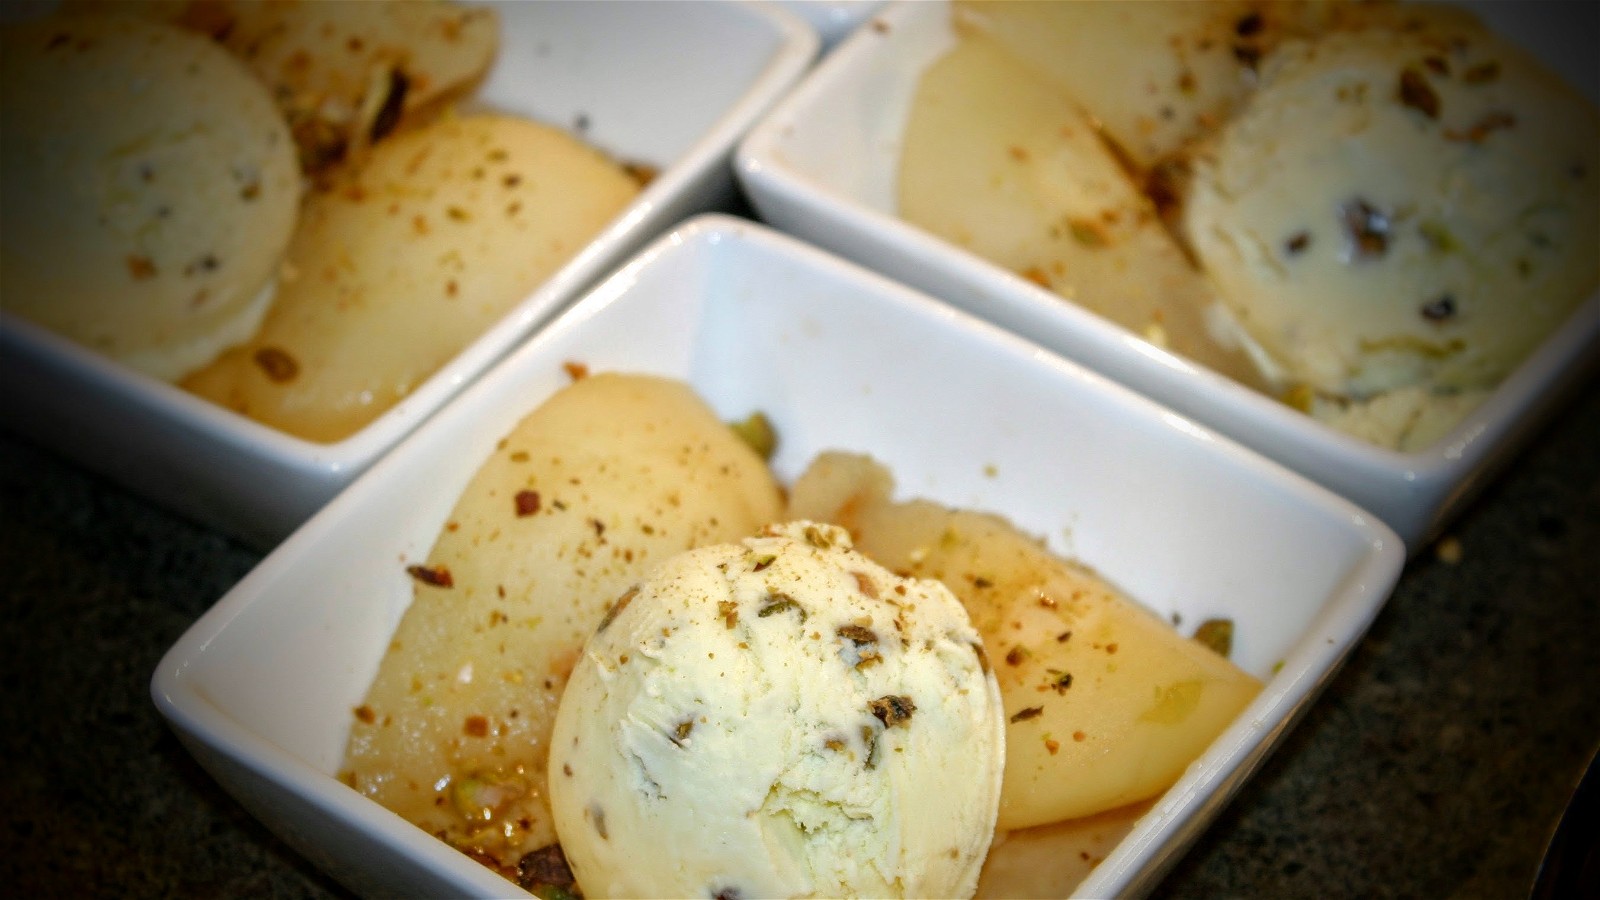 Image of Poached Pears with Pistachio Ice Cream